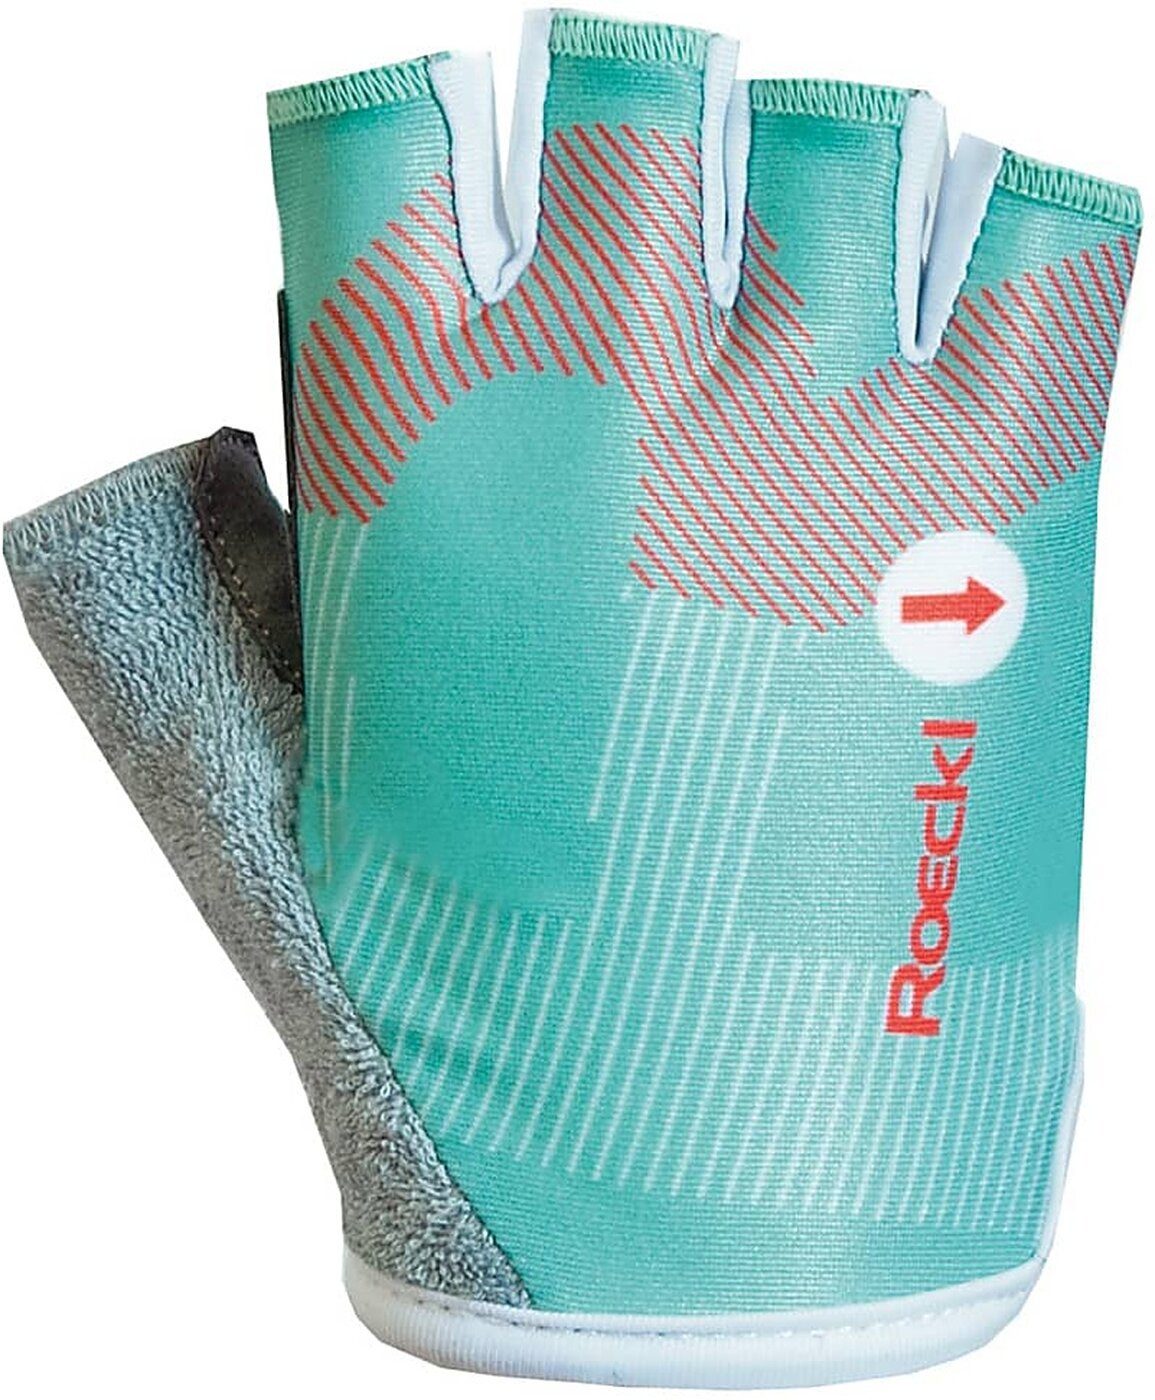 Roeckl 0530 Fahrradhandschuhe turquoise Teo